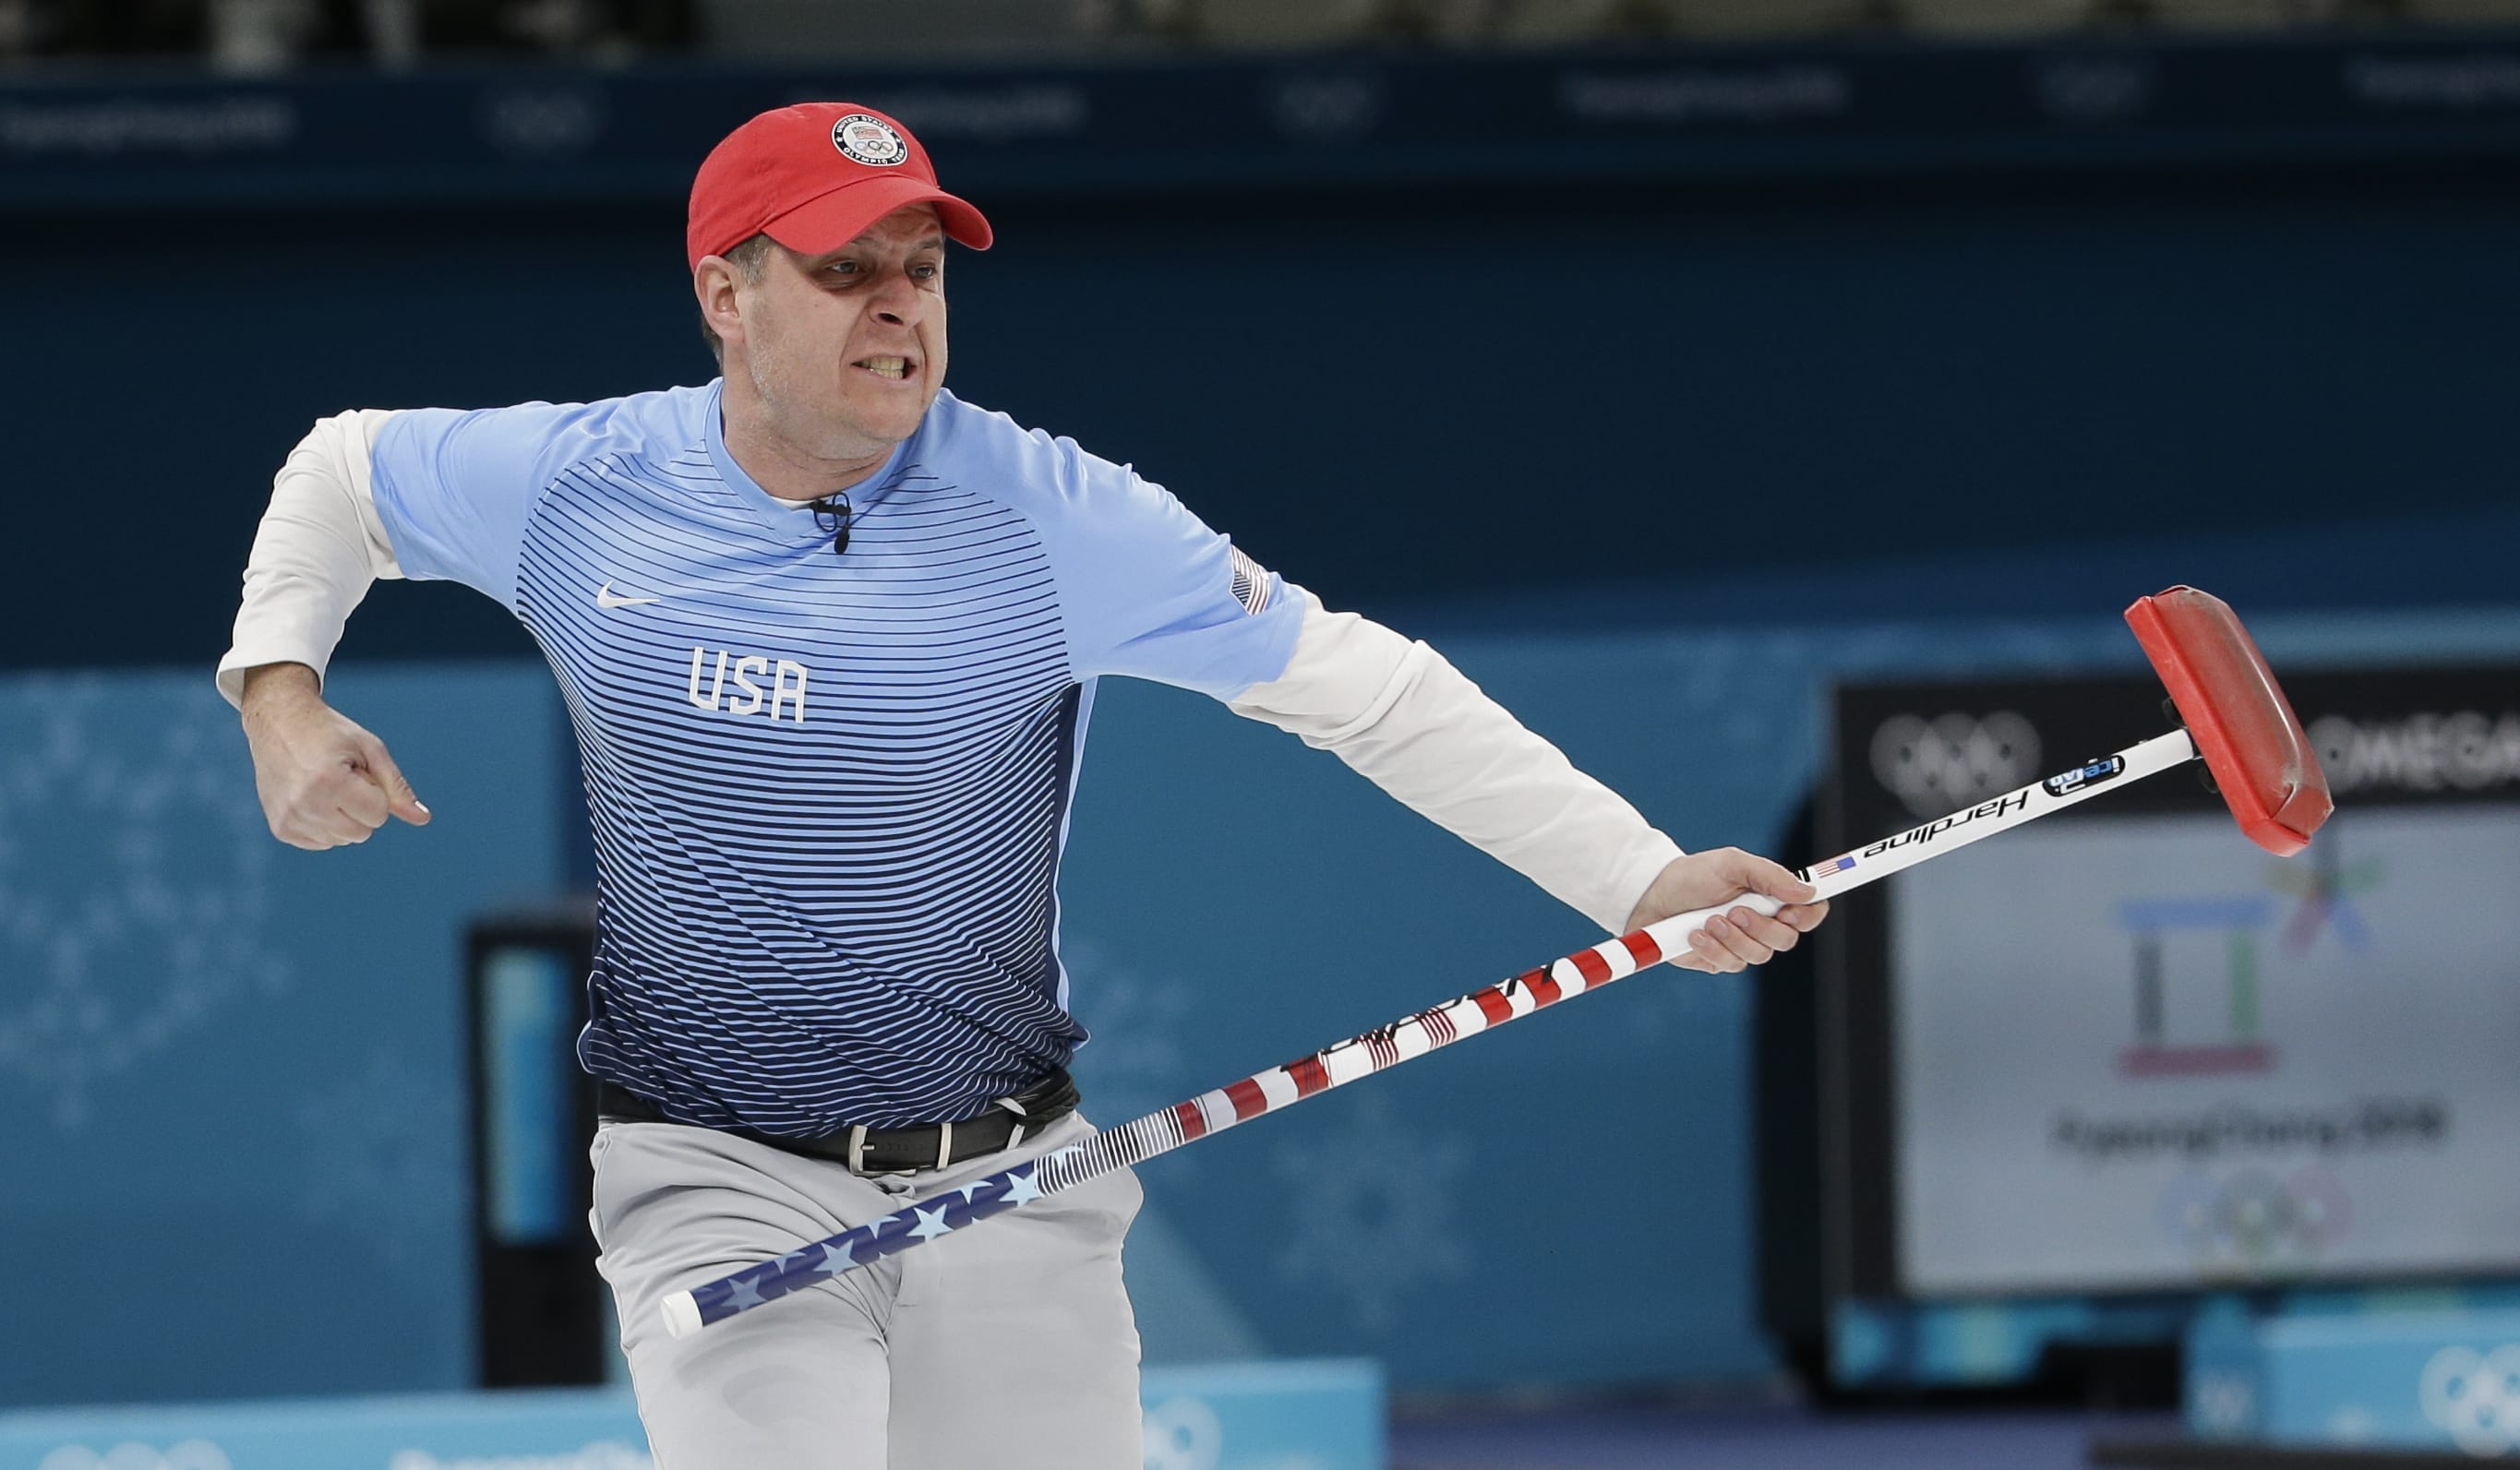 United States's skip John Shuster reacts during the men's final curling match against Sweden at the 2018 Winter Olympics in Gangneung, South Korea, Saturday, Feb. 24, 2018.